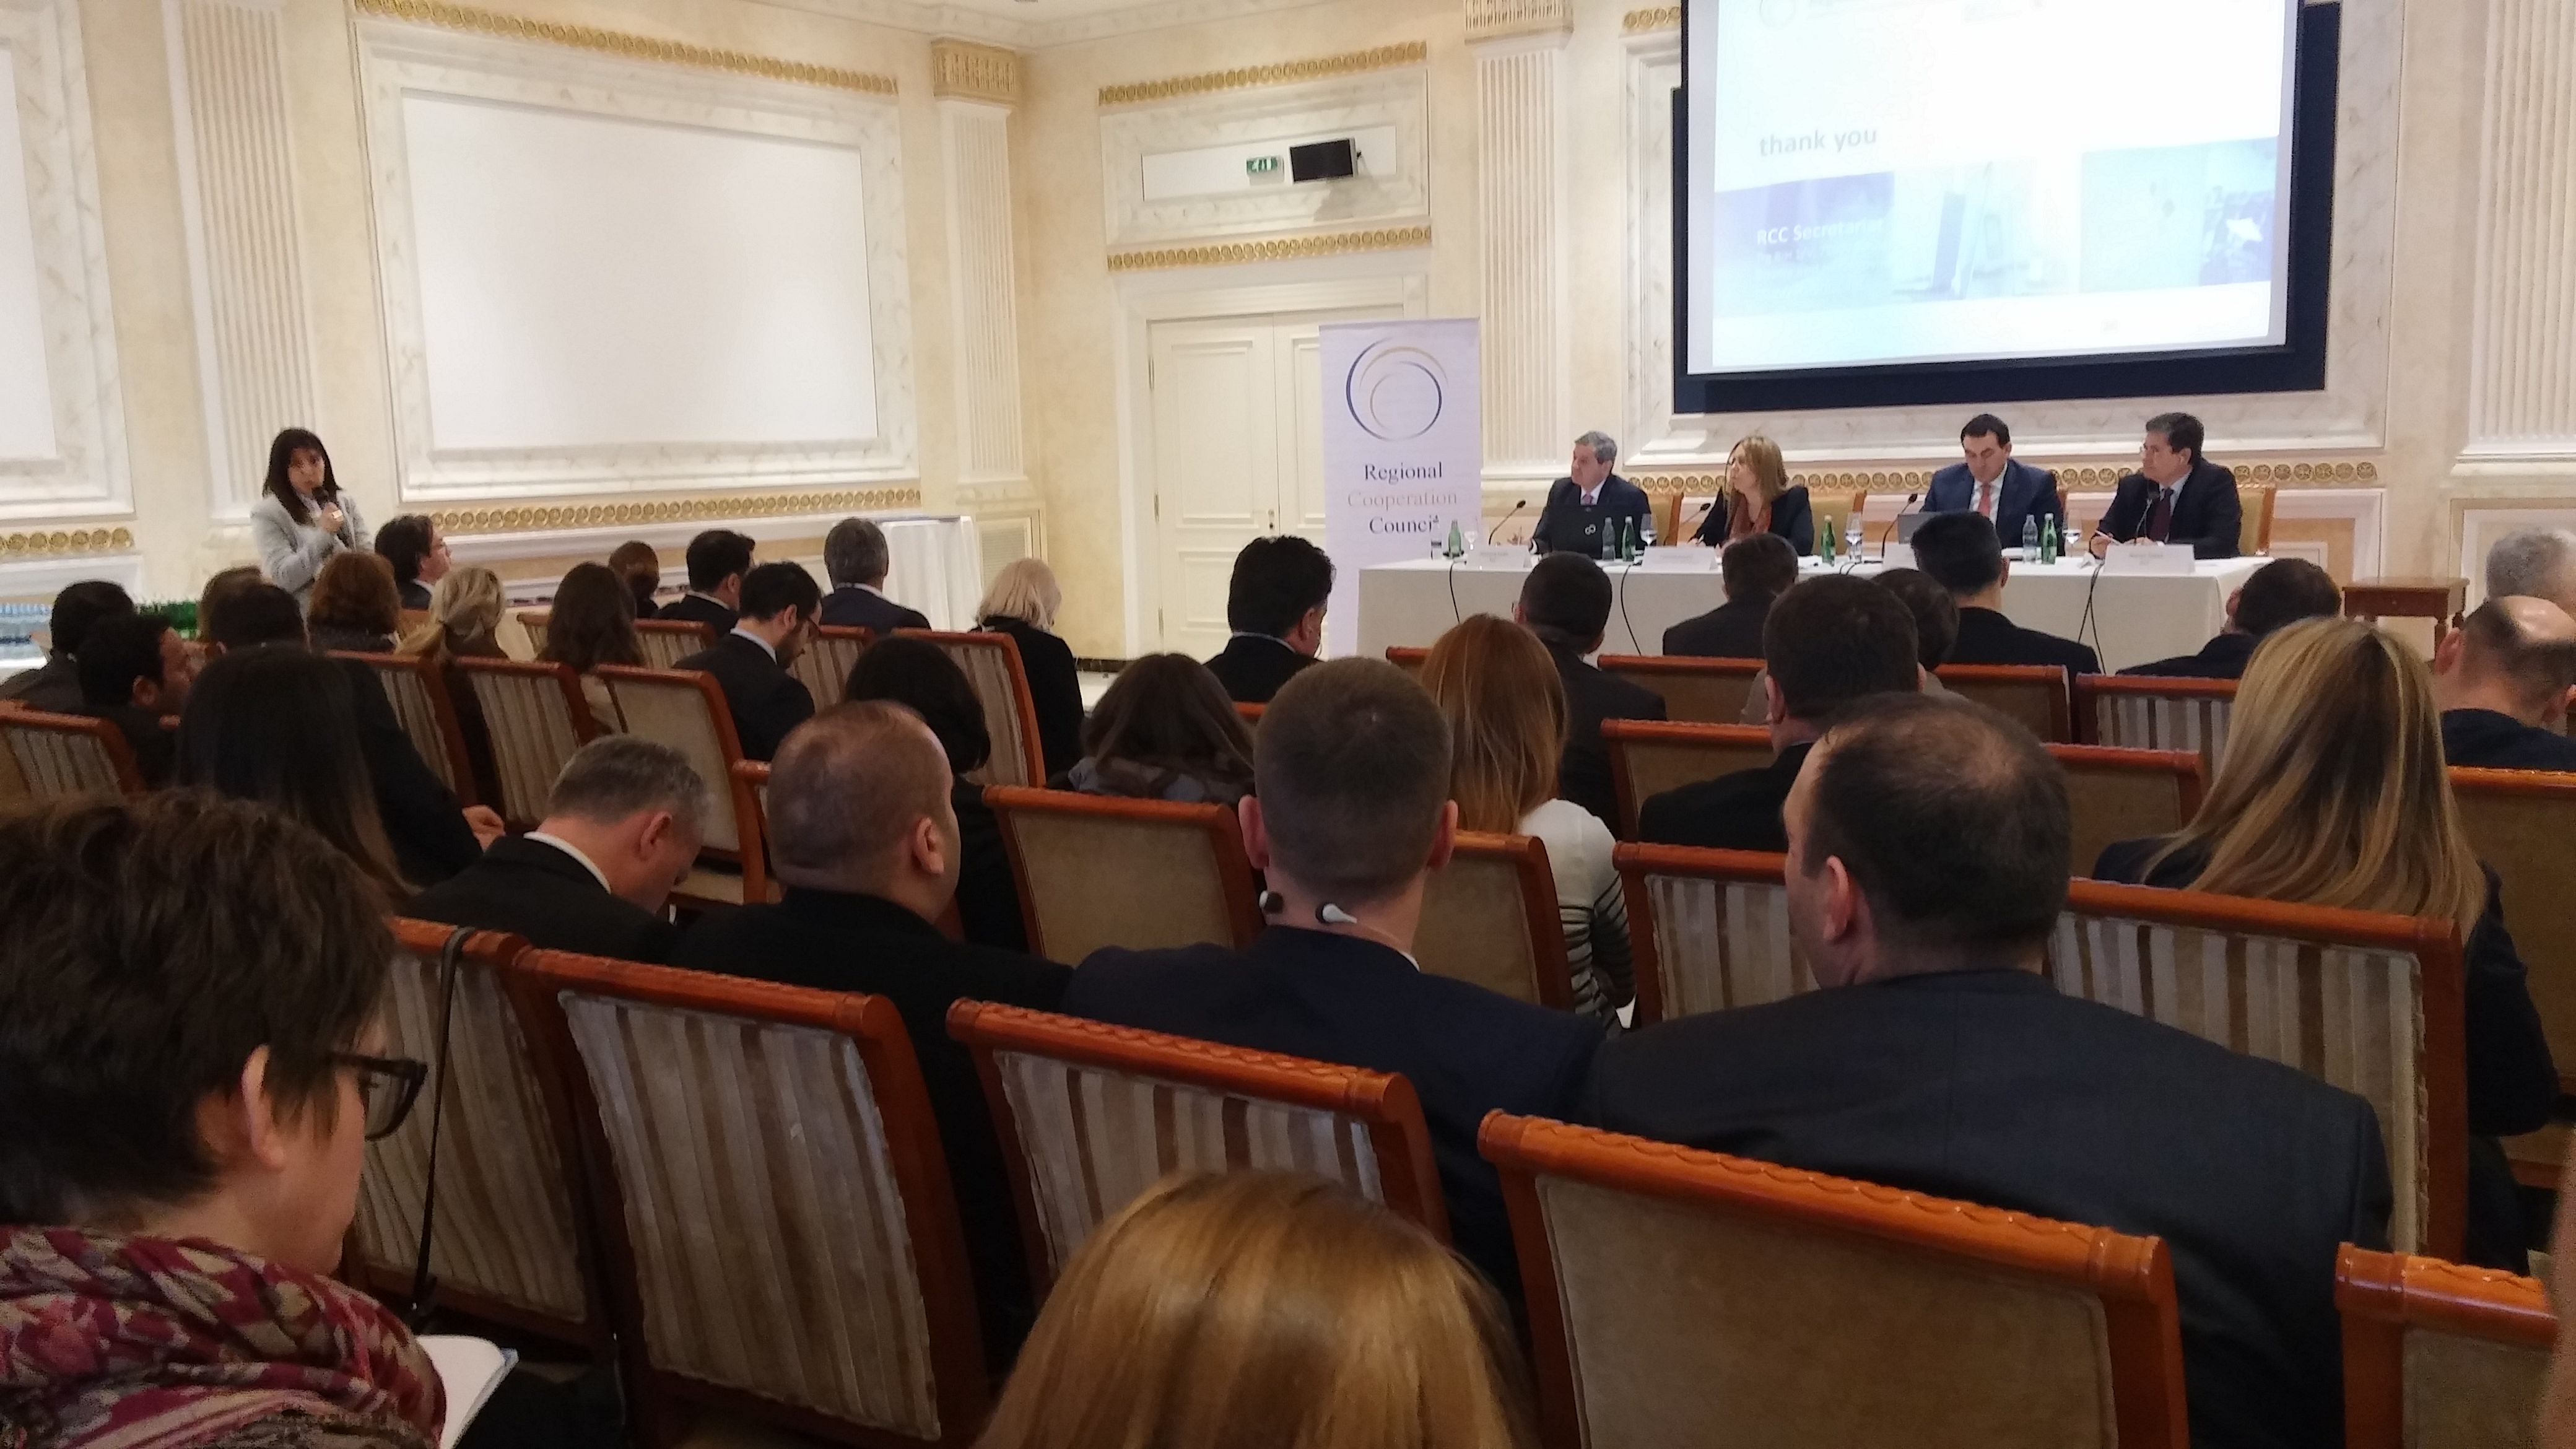 The implementation of the RCC's SEE 2020 strategy, was the focus of the conference in Pristina, organized by the RCC Secretariat in cooperation with the Ministry of Trade and Industry, and the OECD, on 3 February 2015. (Photo RCC/Selma Ahatovic-Lihic)